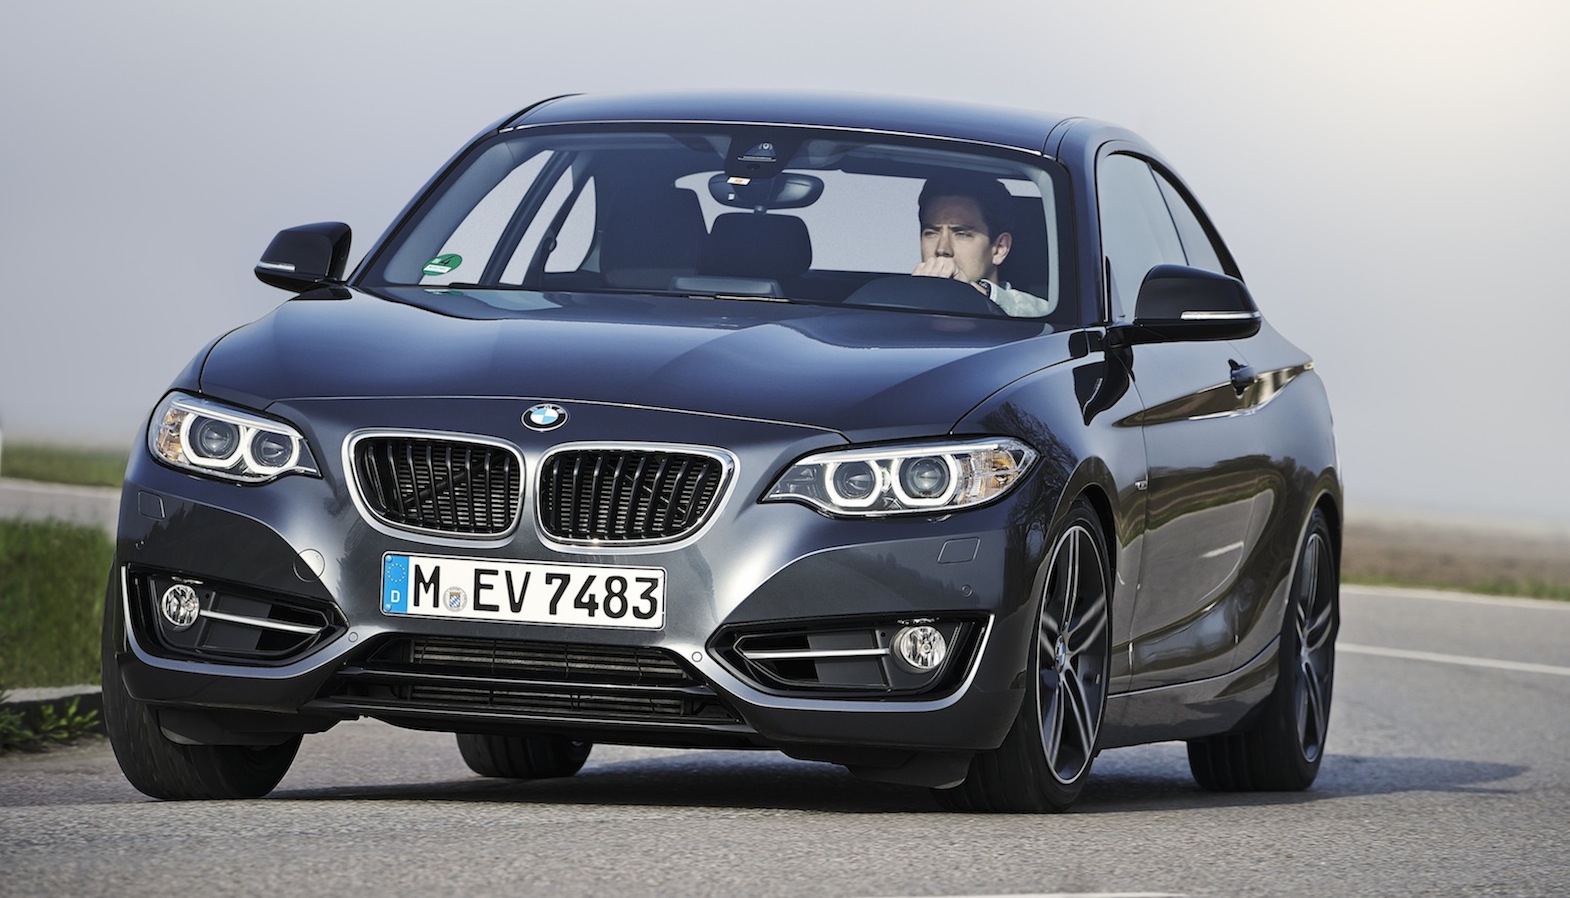 BMW 228i Coupe here in September from $64,400 - photos | CarAdvice